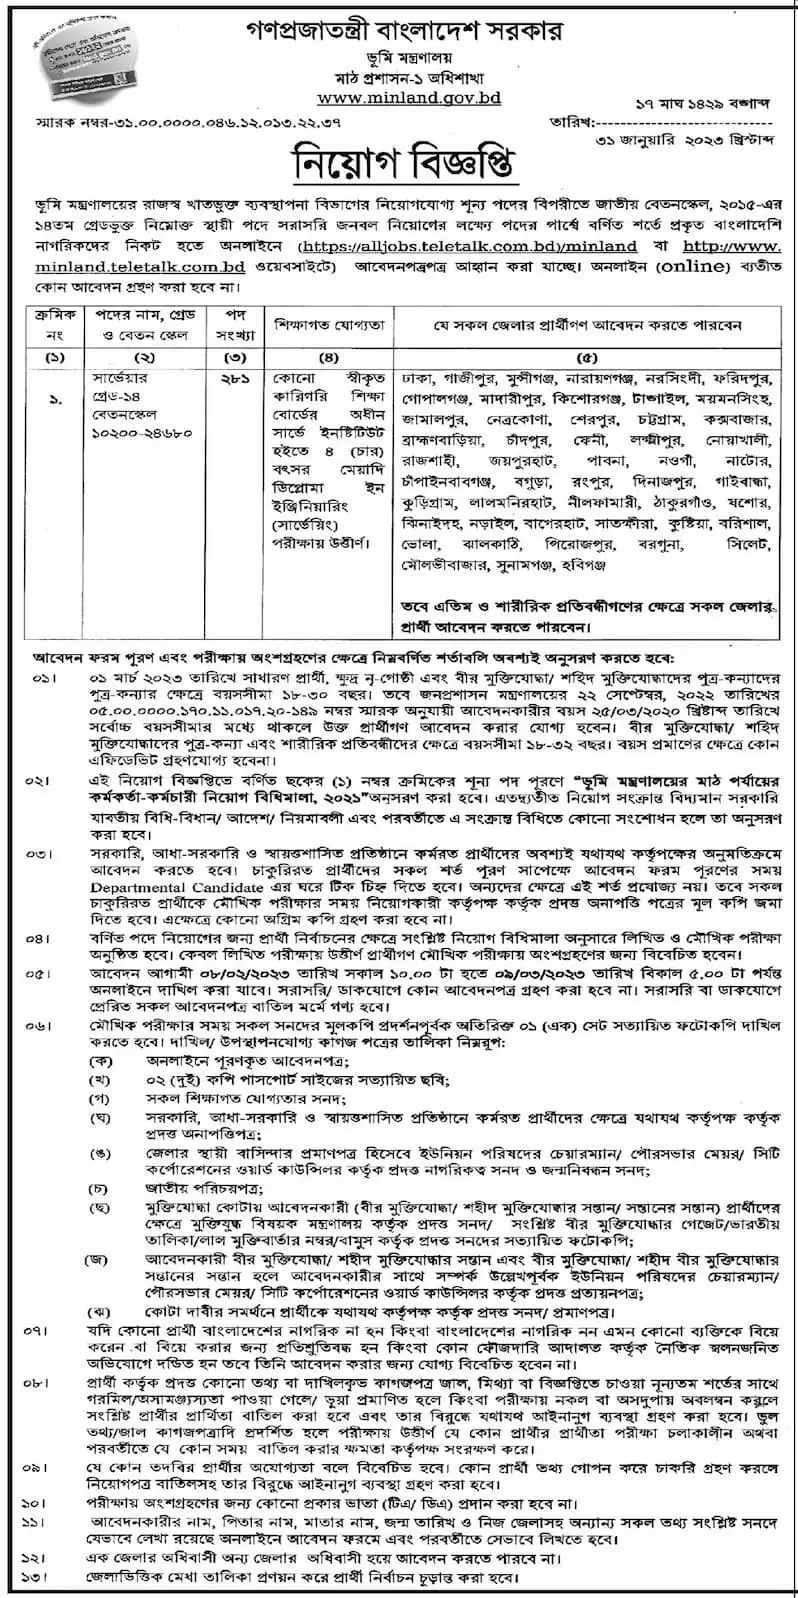 Ministry of Land (MINLAND) Recruitment Circular published on 31 January 2023